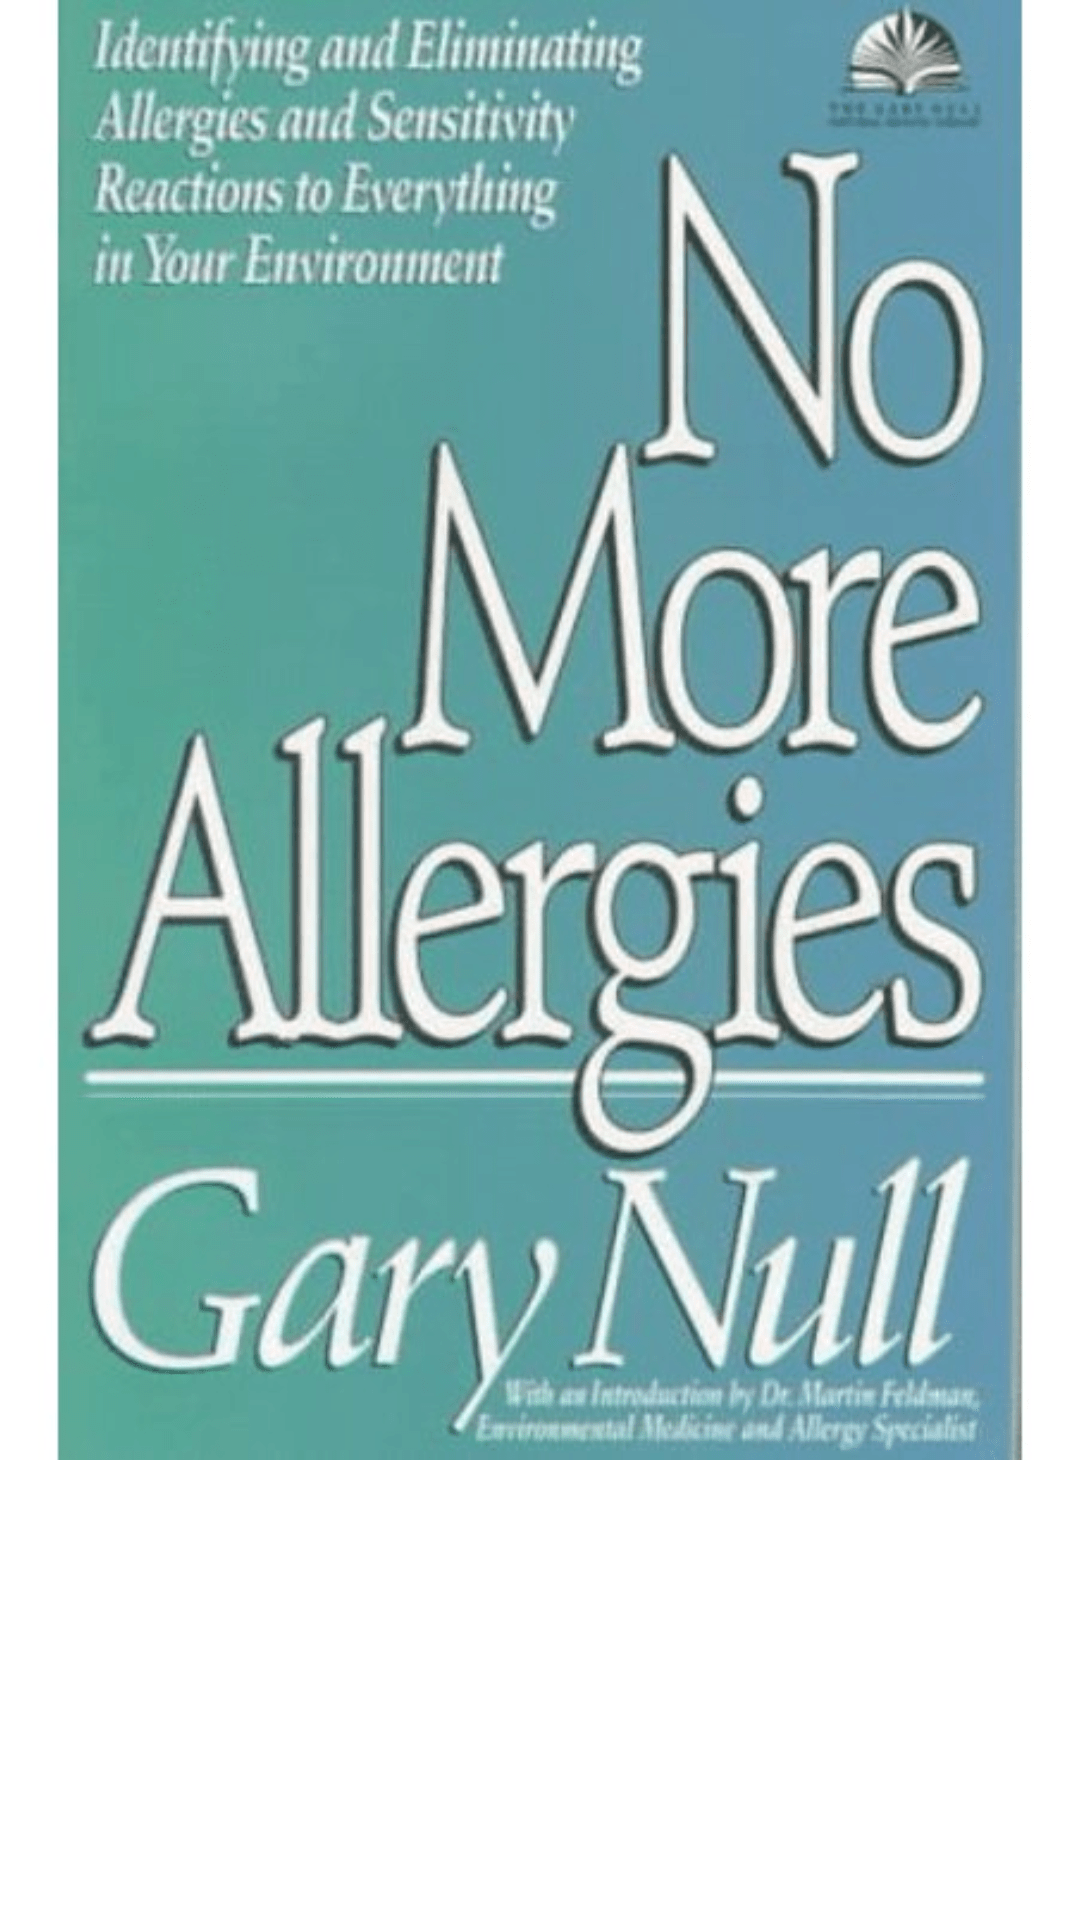 No More Allergies: Identifying and Eliminating Allergies and Sensitivity Reactions to Everything in Your Environment